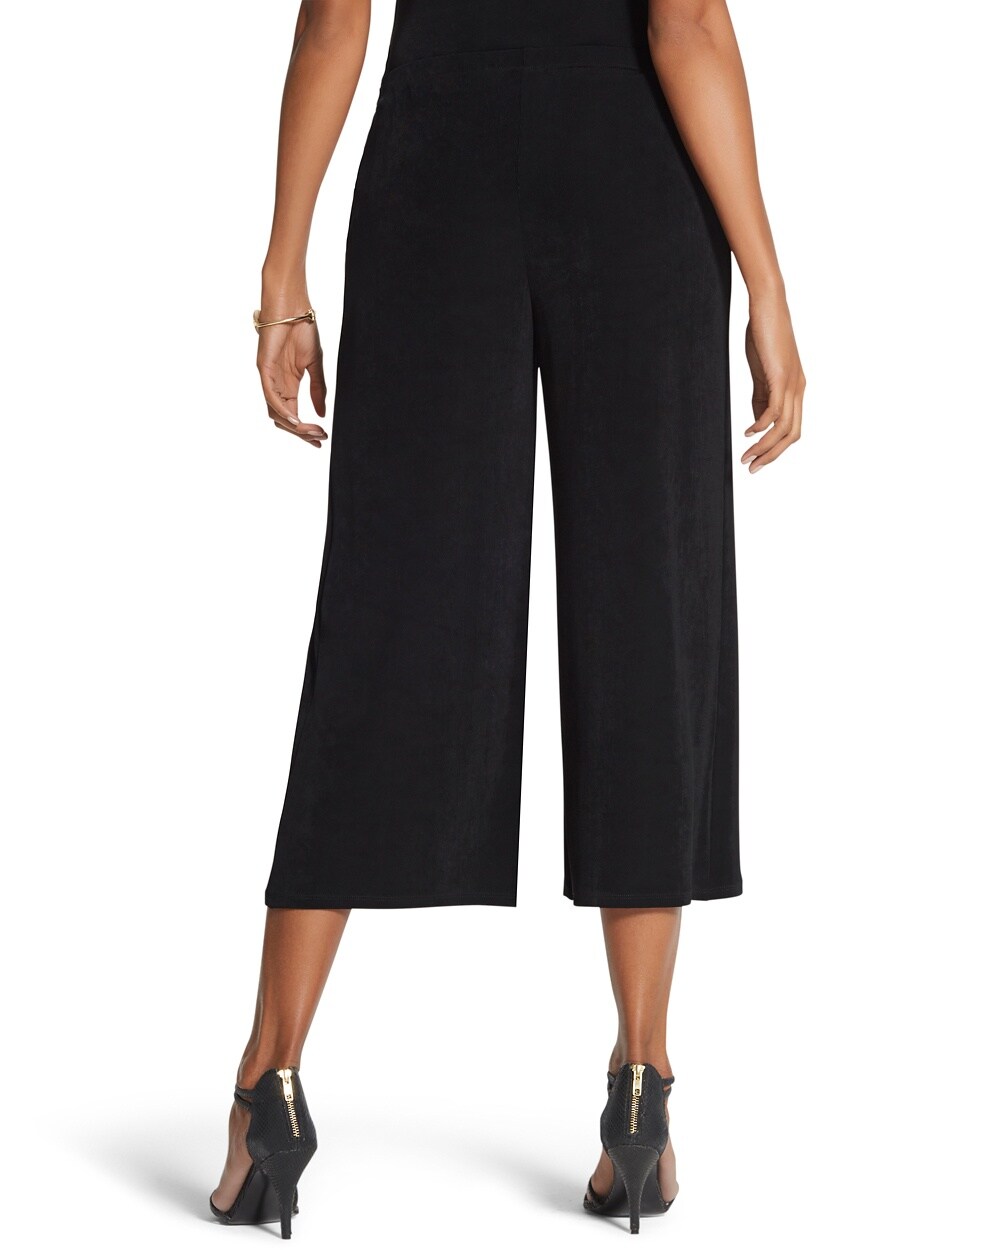 Travelers Classic Cropped Pants - Chico's